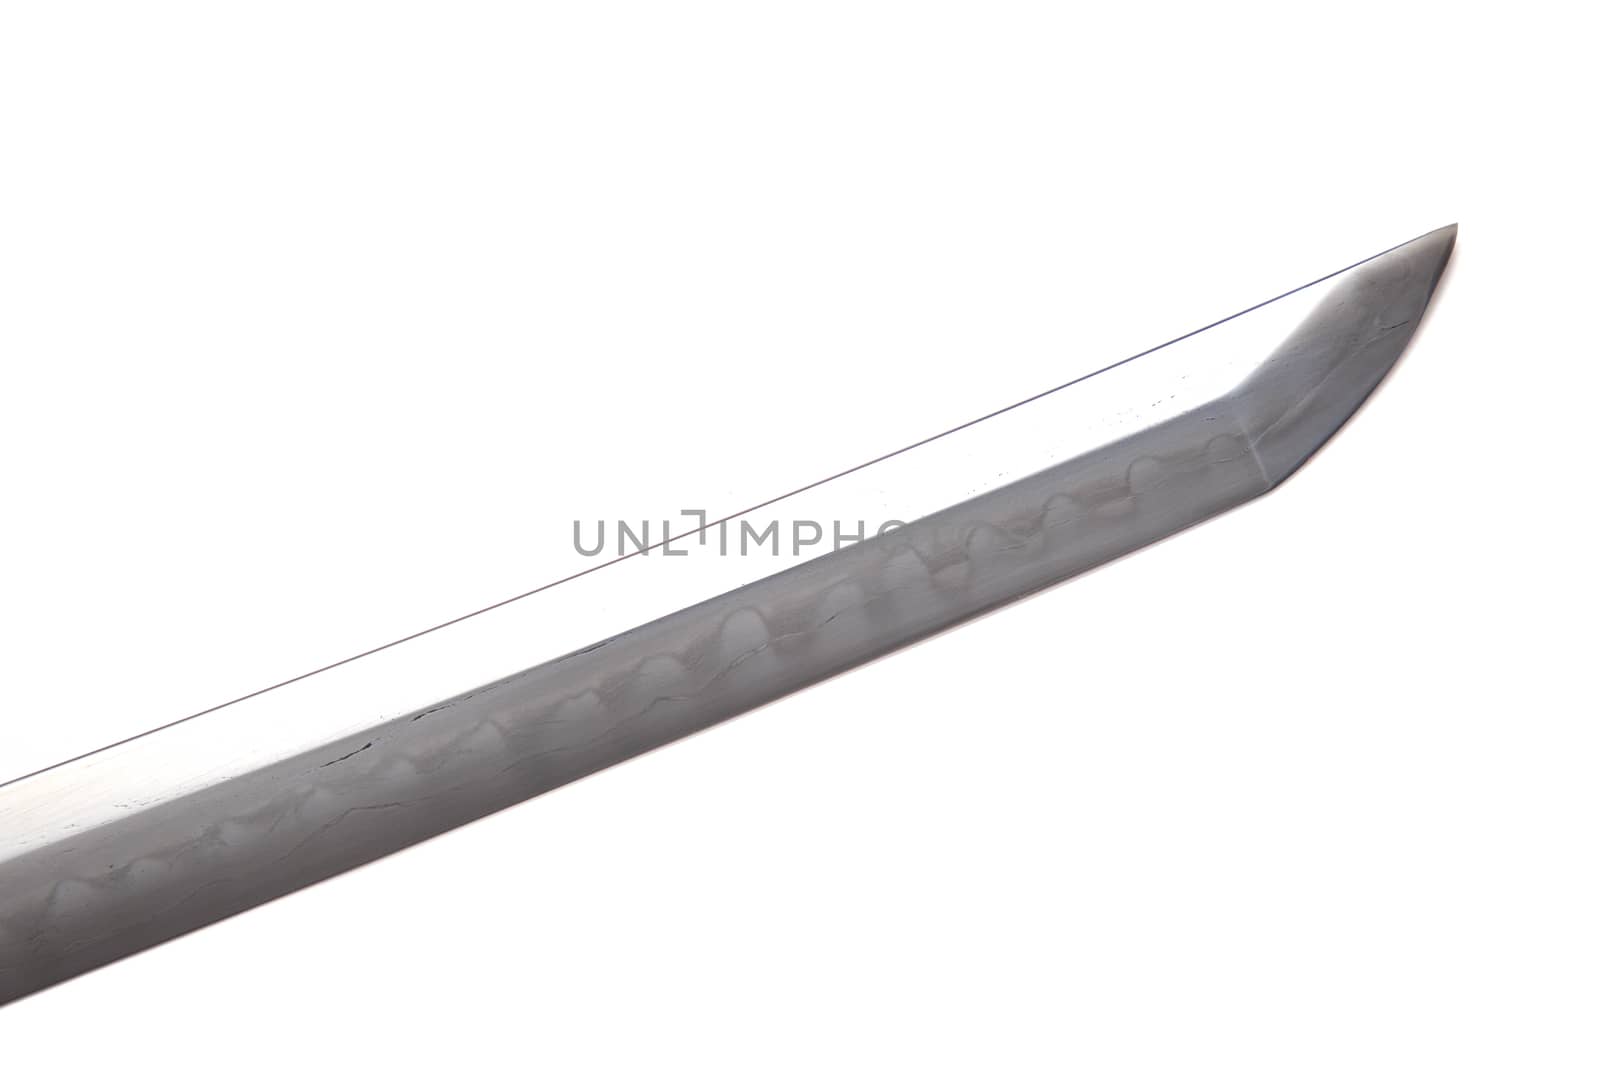 Japanese sword blade (made in China) on white background.  The blacksmith forged several folds until several layers were formed. Can be seen clearly on the surface. Soft focus.